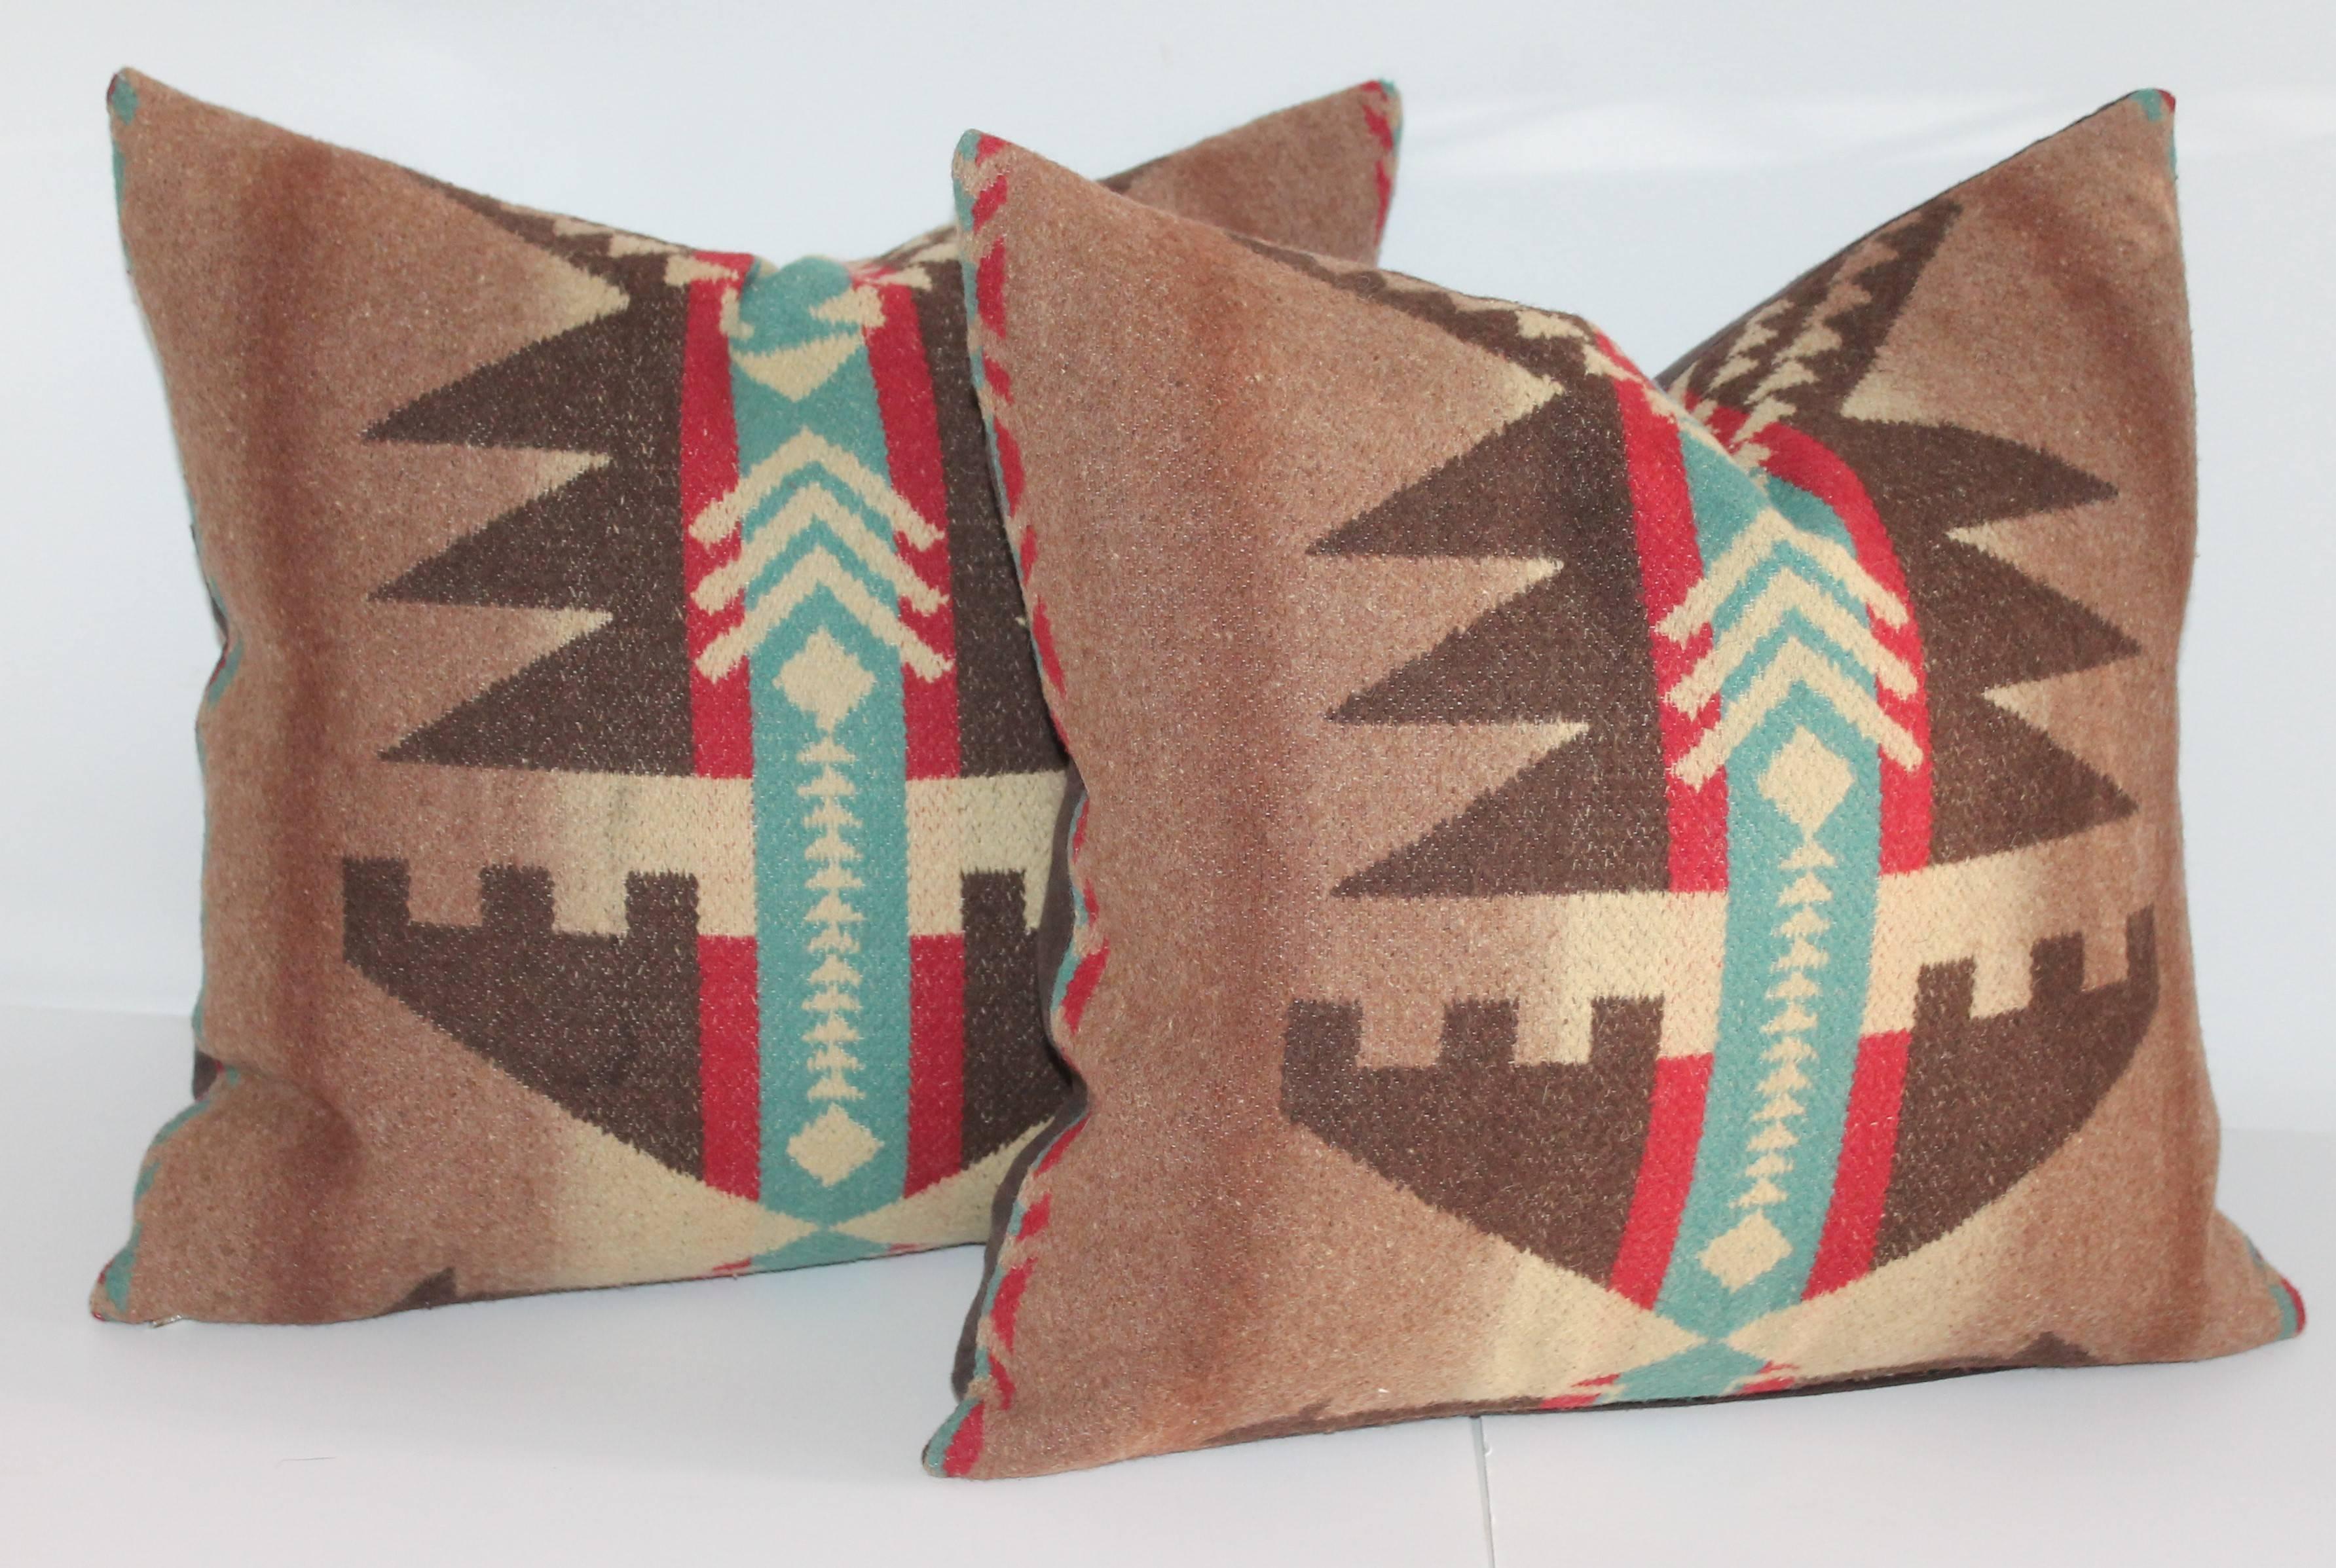 These Beacon blanket pillows with a Native American motif are in great condition and have a chocolate brown cotton linen backings. The large bolster pillow is measure: 16" x 28" and the two square pillows are 16" x 16 ". Sold as